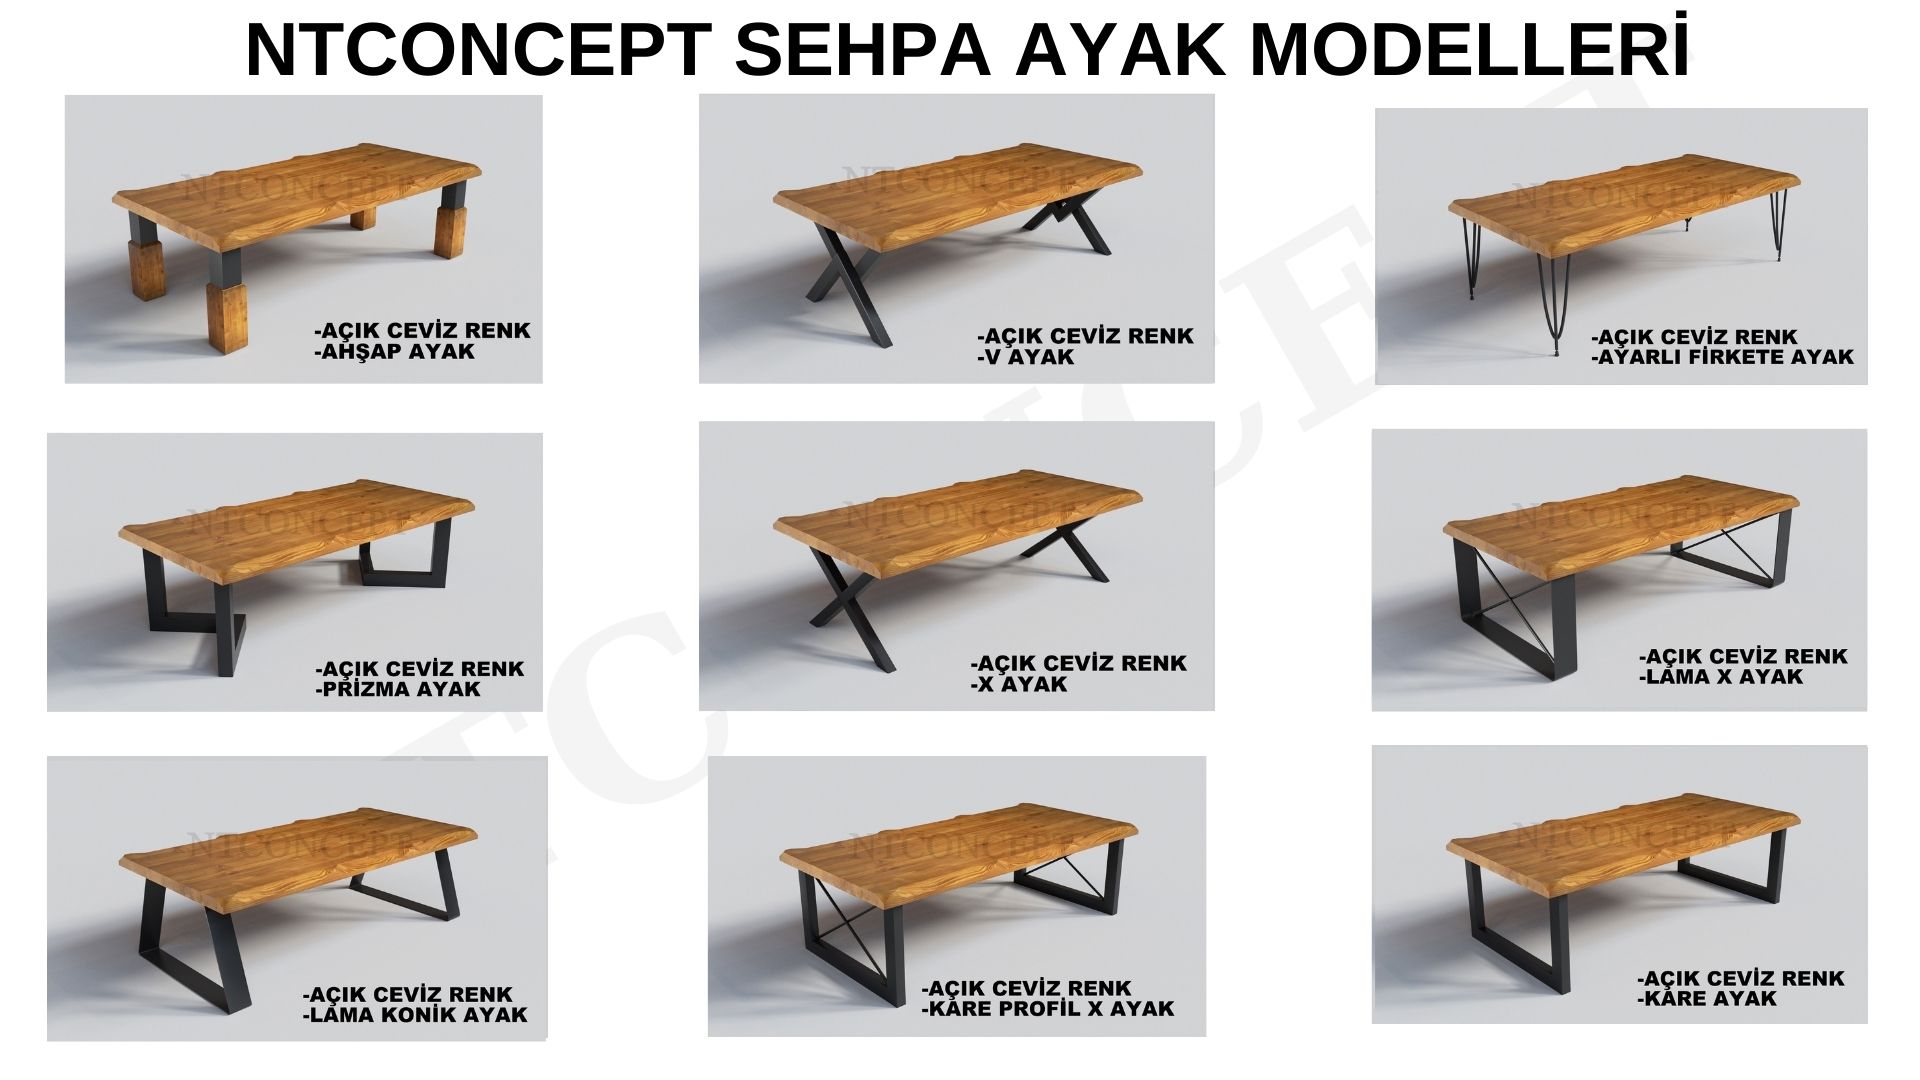 Sui%20Ntconcept%20Masif%20Ahşap%20Sehpa